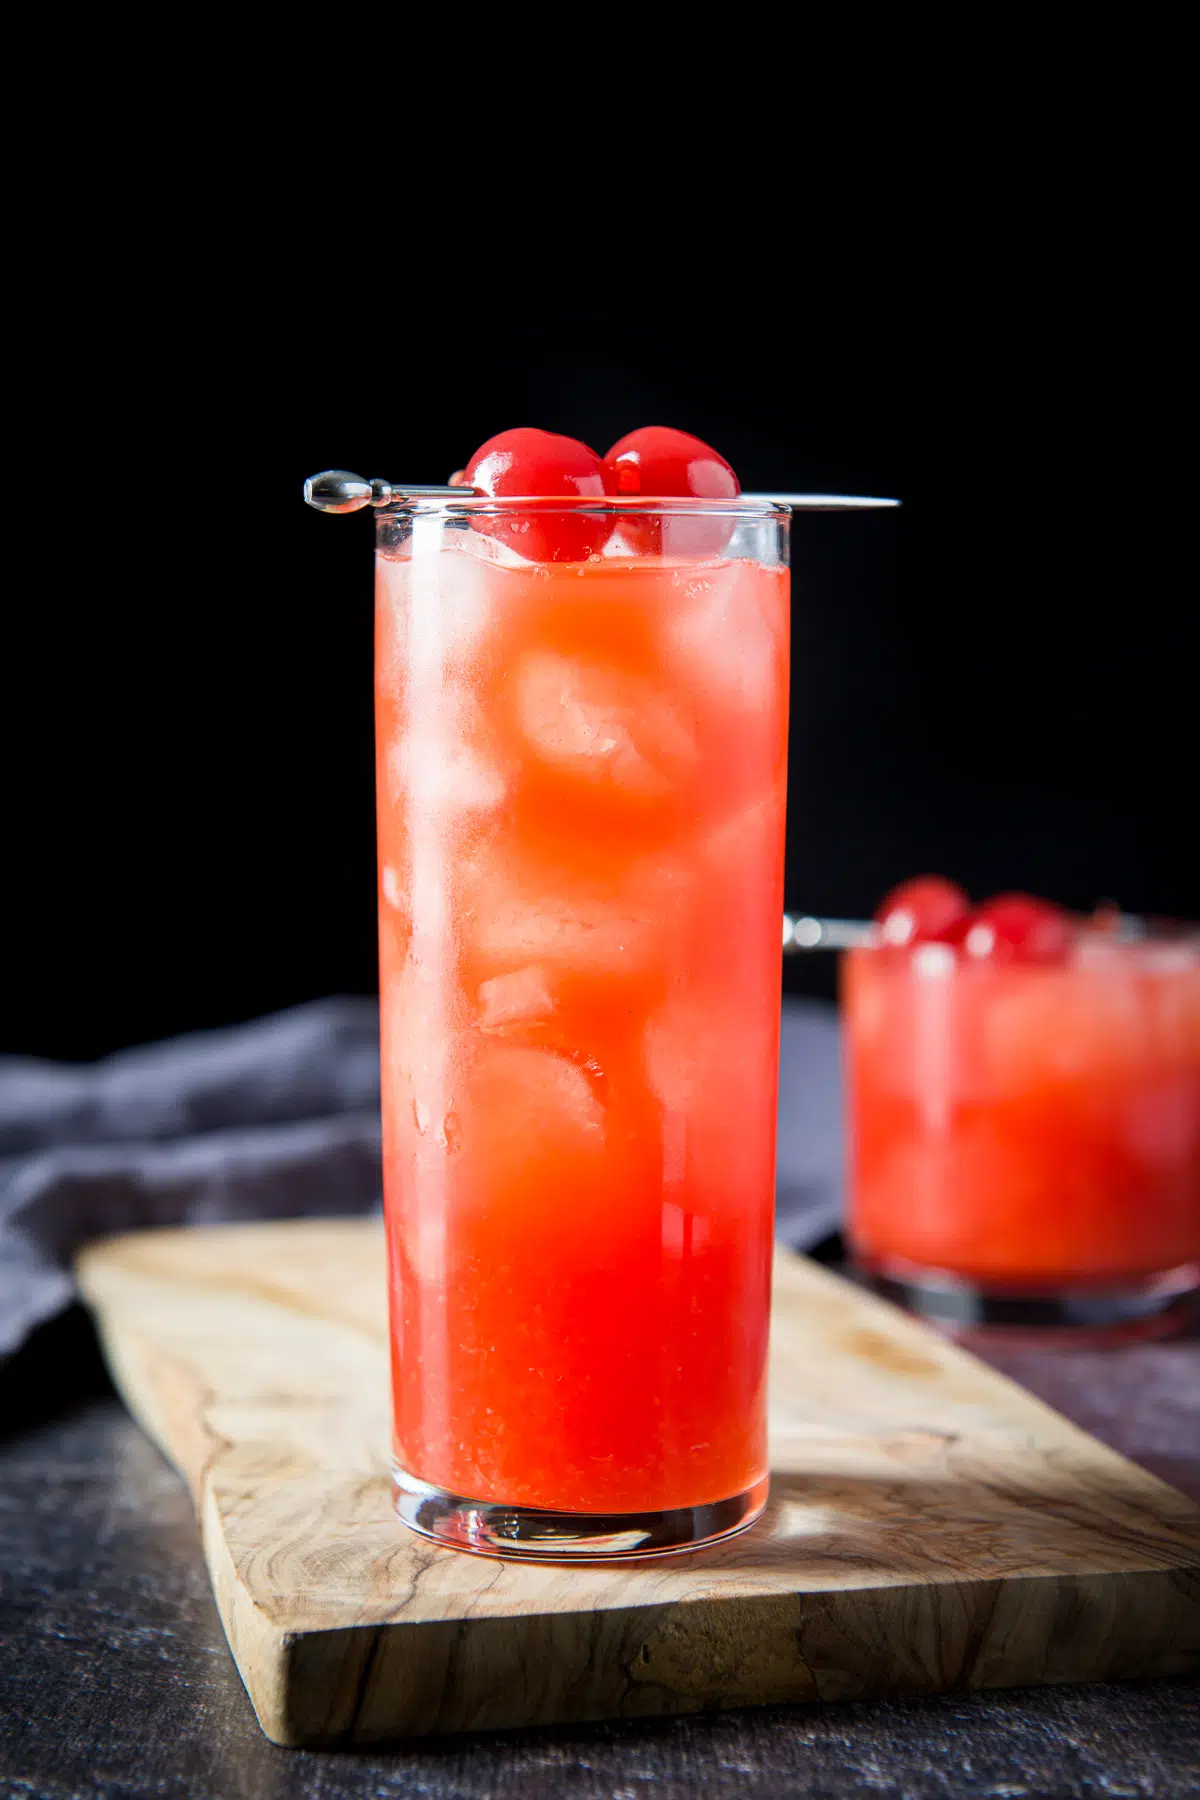 Vertical view of the tall glass filled with the cocktail with two cherries on a pick